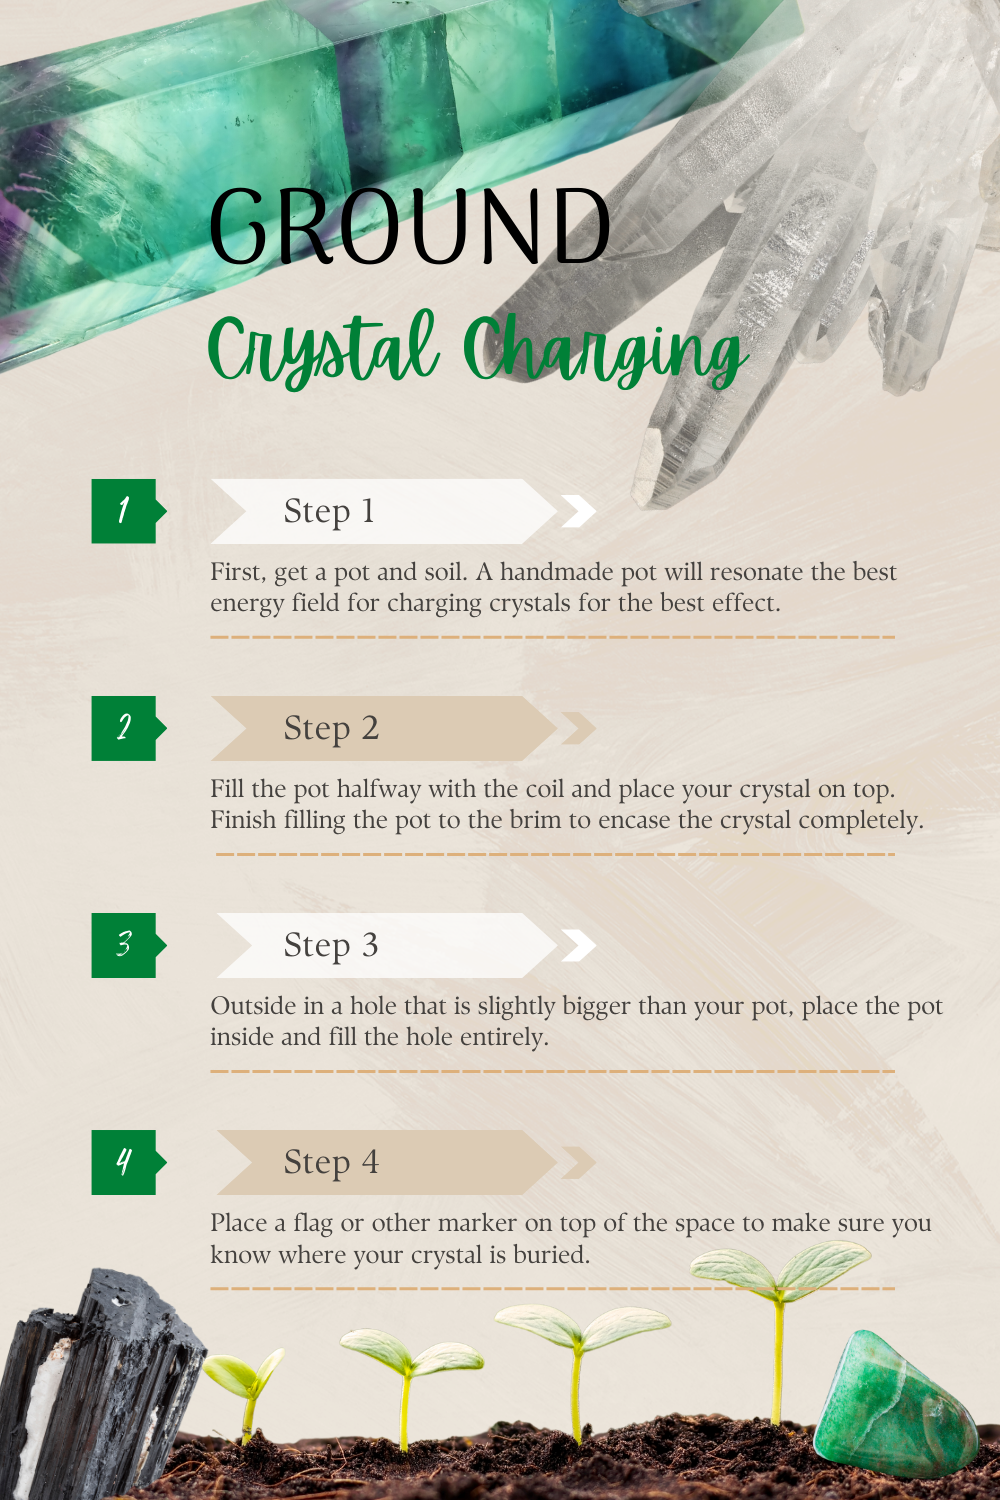 ground crystal charging - how to charge your crystals in the ground instructions